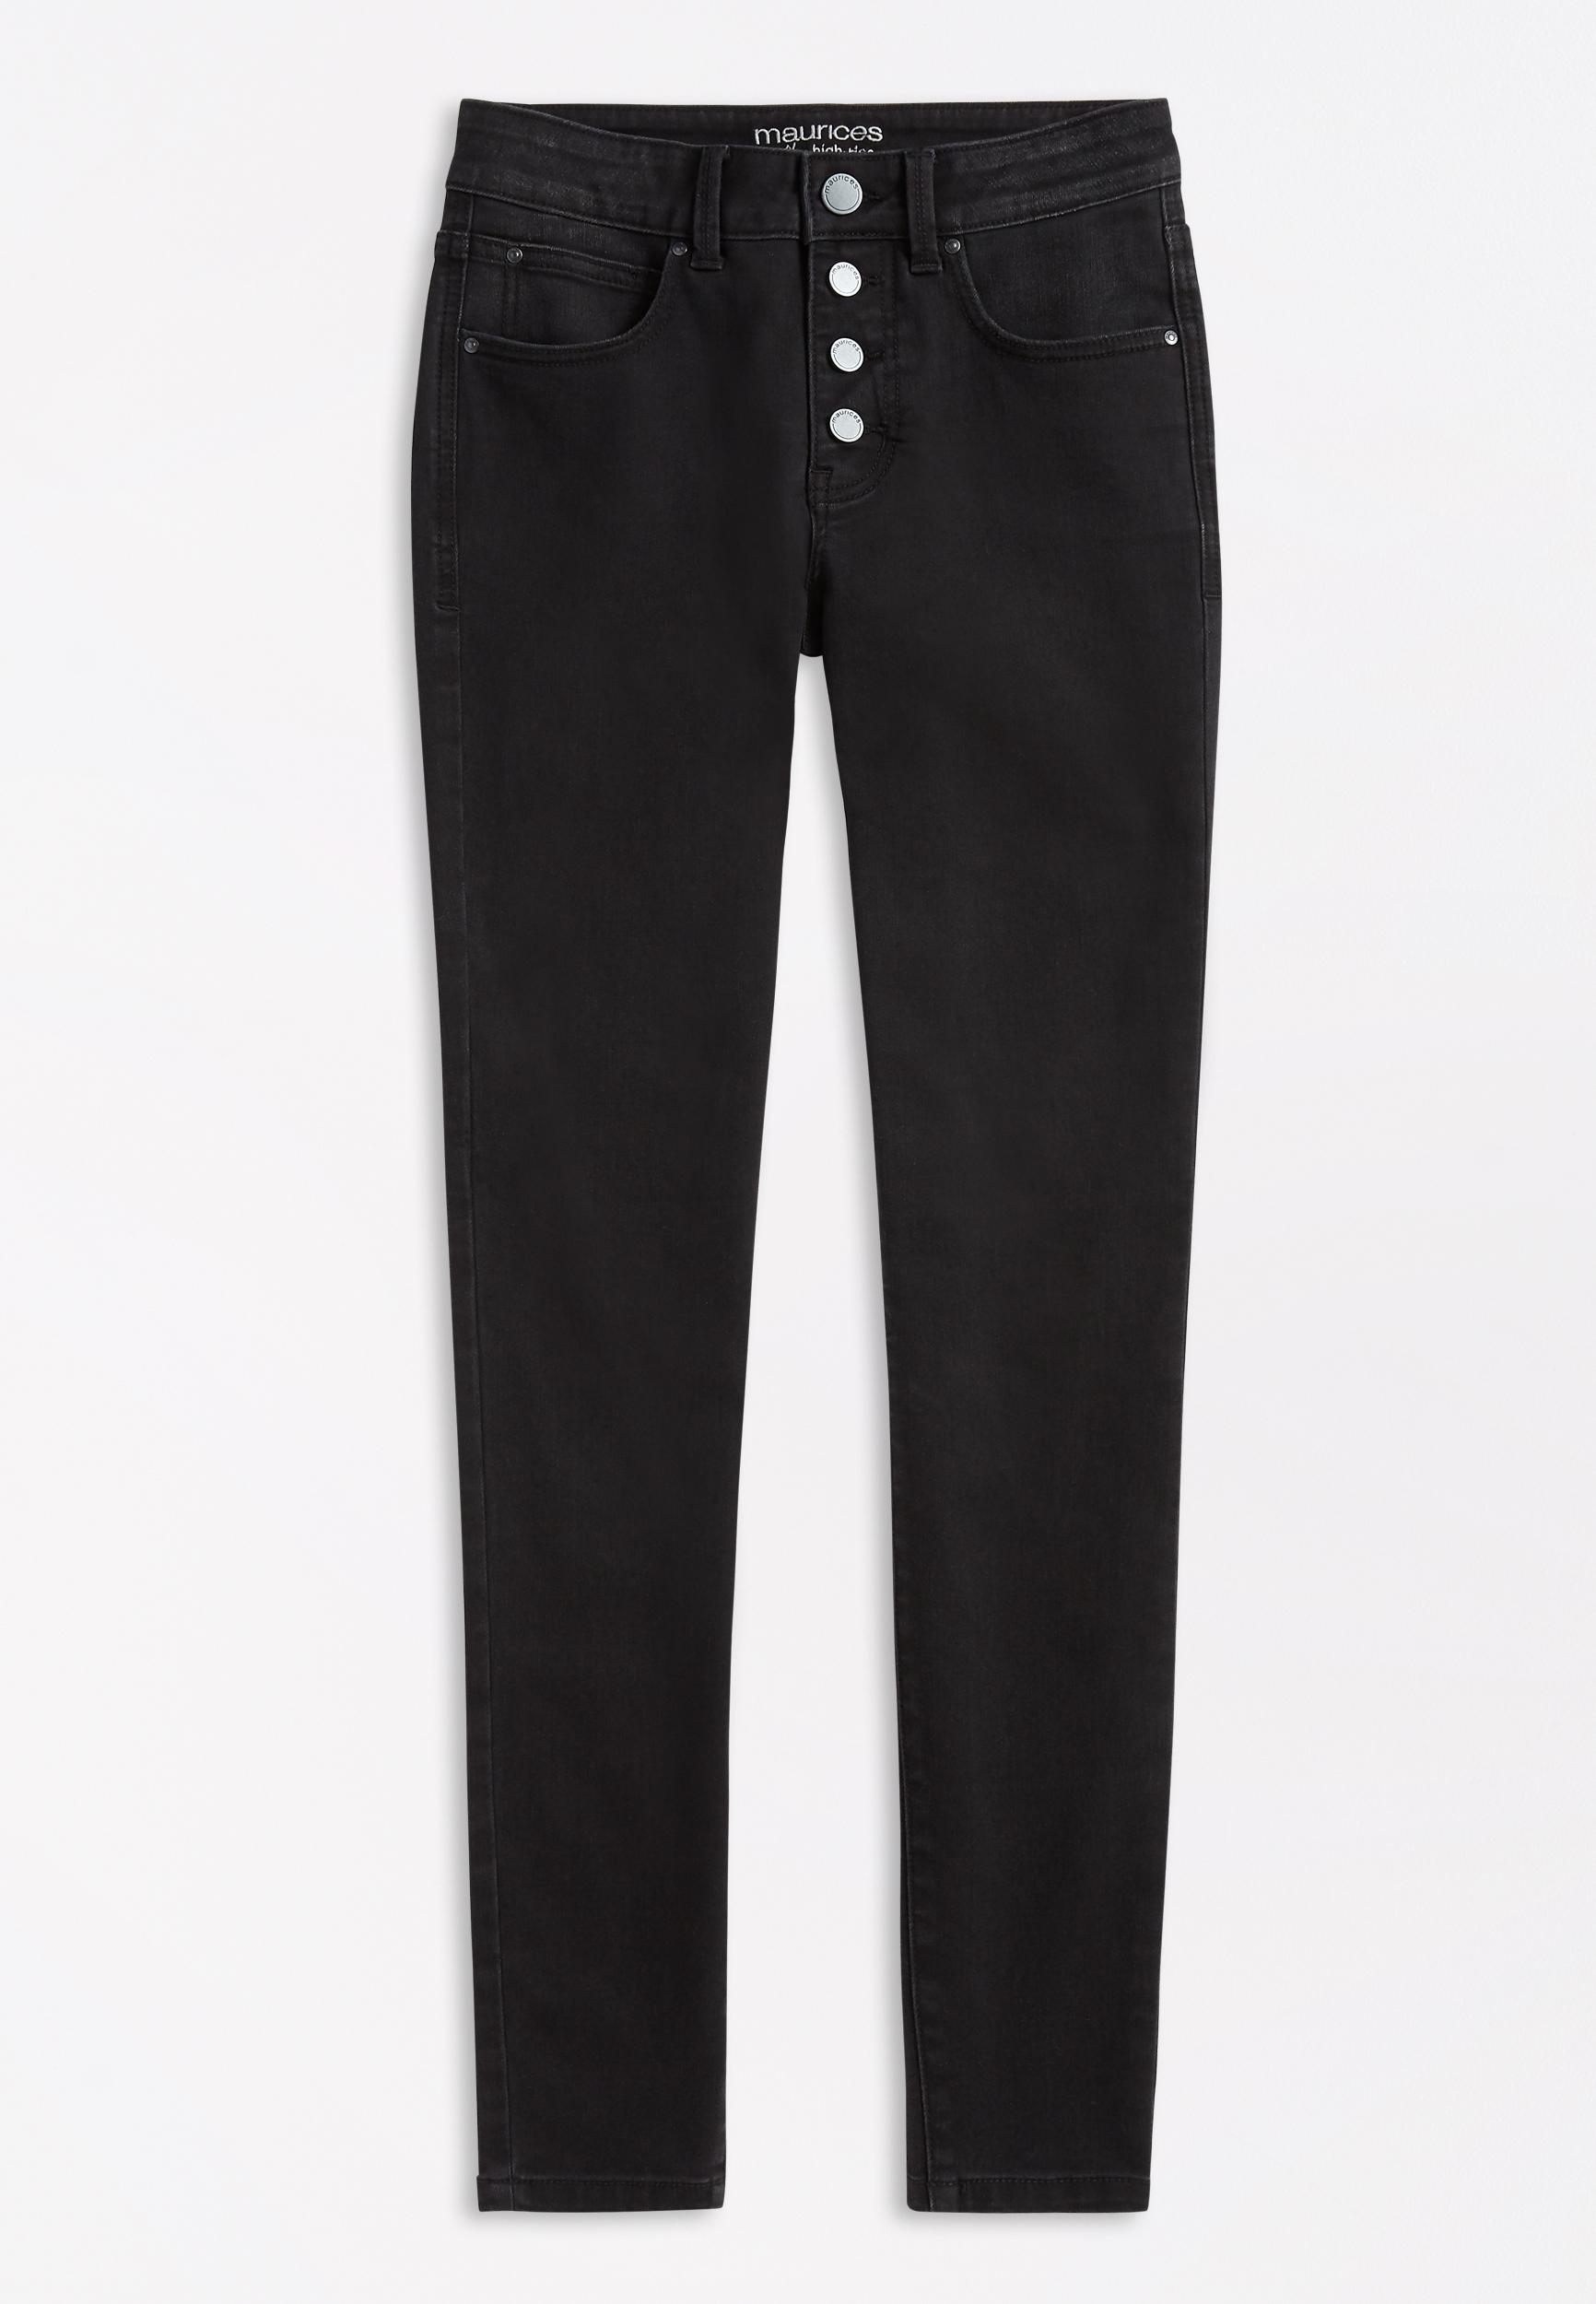 Everflex™ High Rise Black Button Fly Super Skinny Jean | maurices